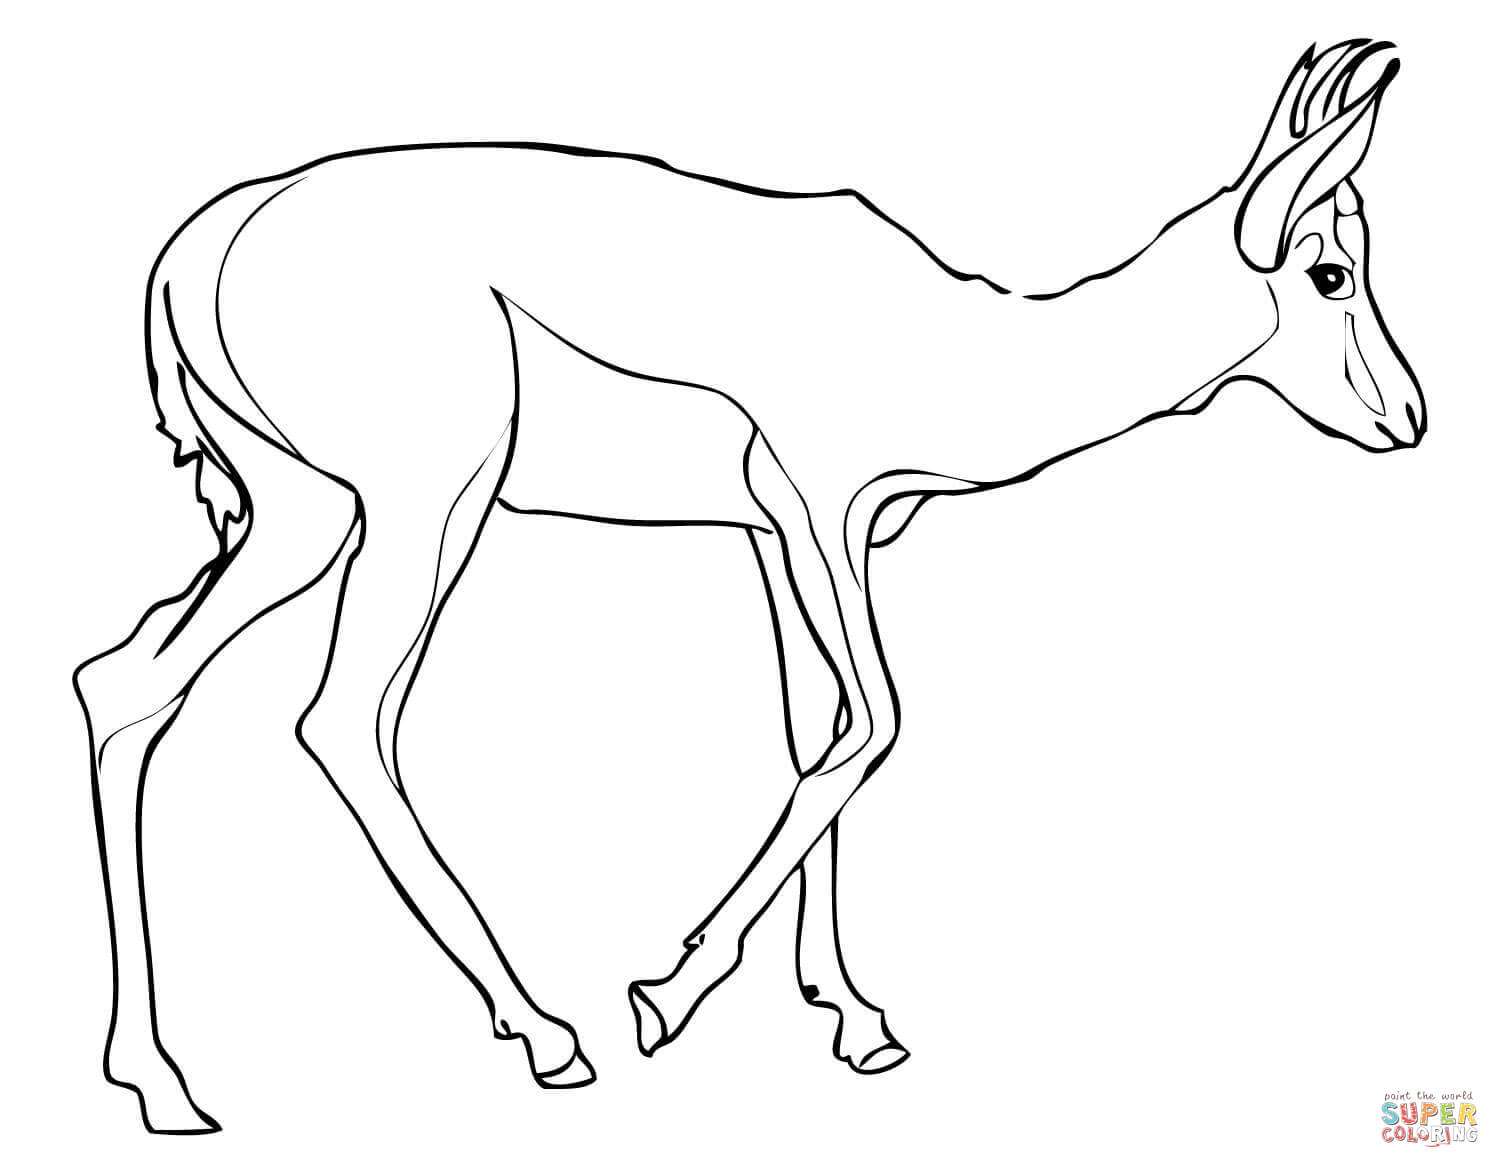 Gazelle coloring #12, Download drawings